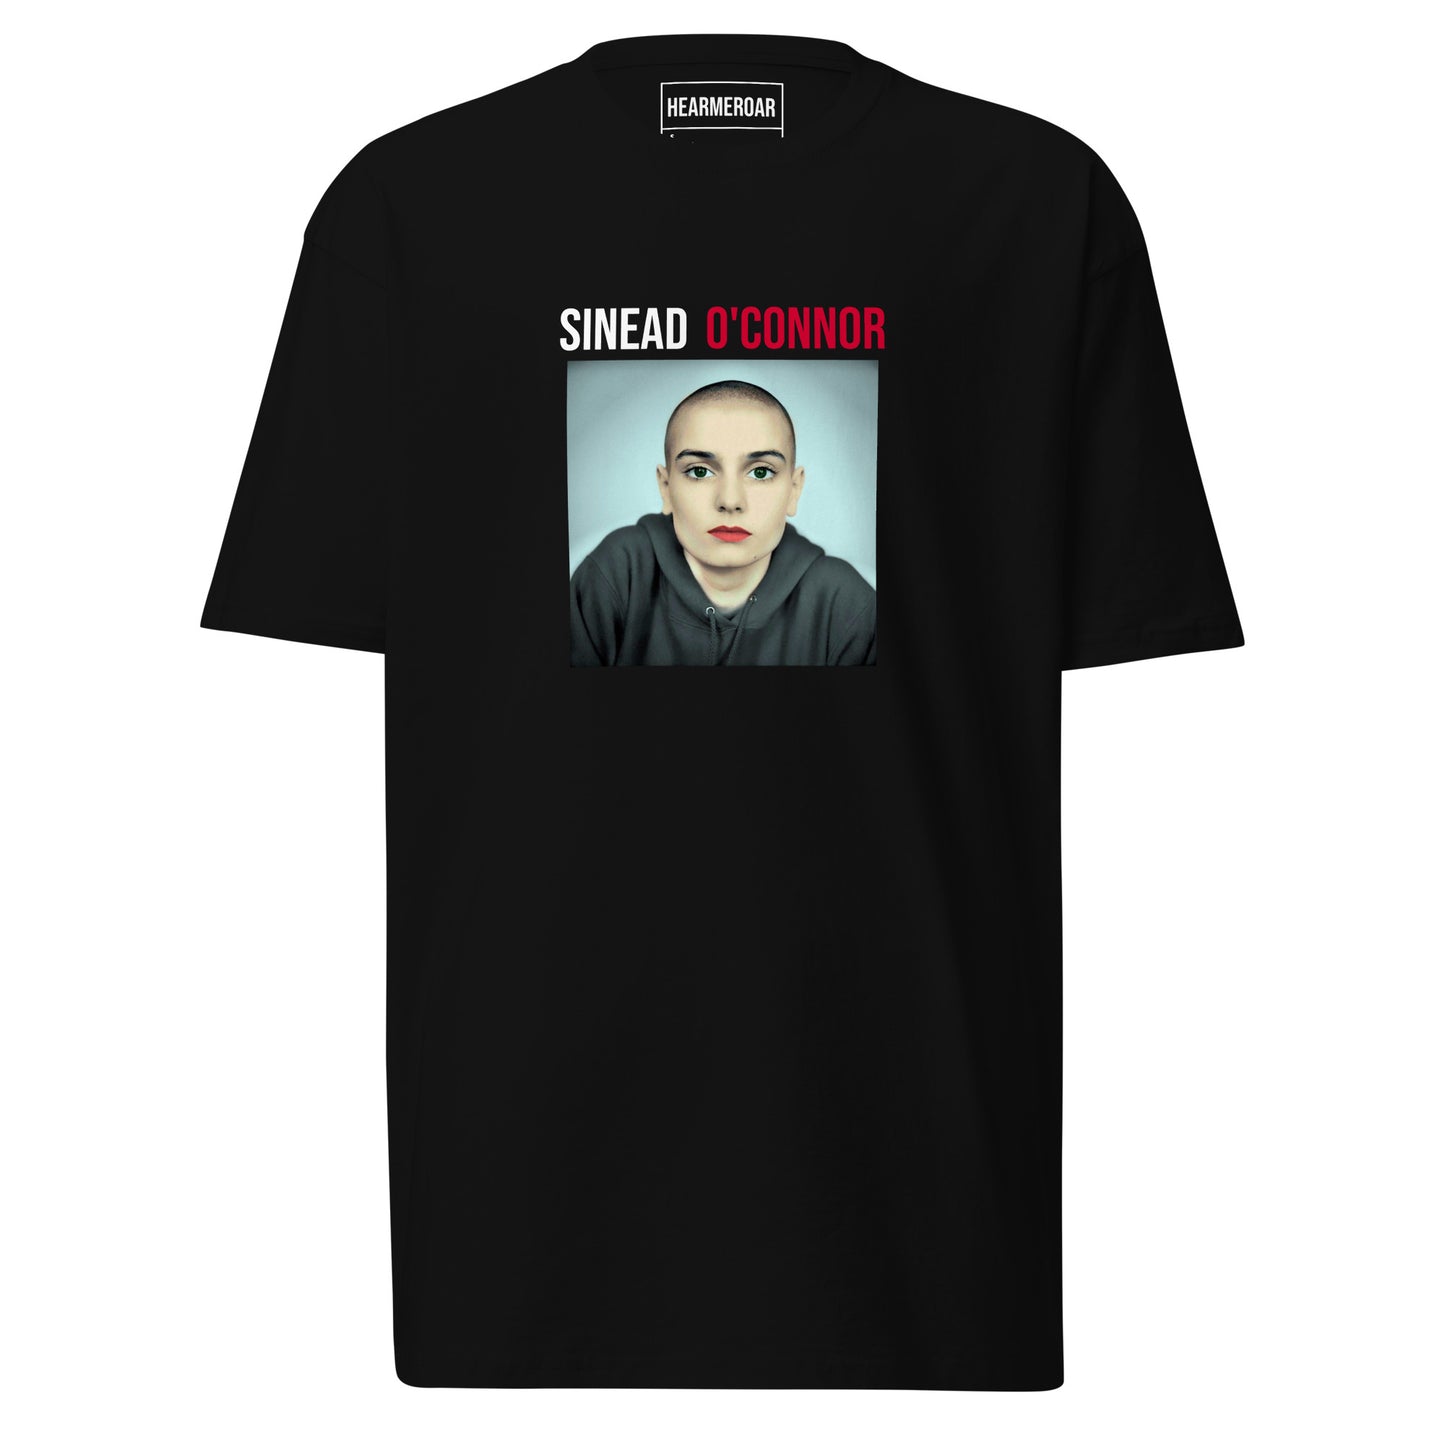 Sinead O'Connor / Rest In Peace Men’s Heavyweight T-Shirt